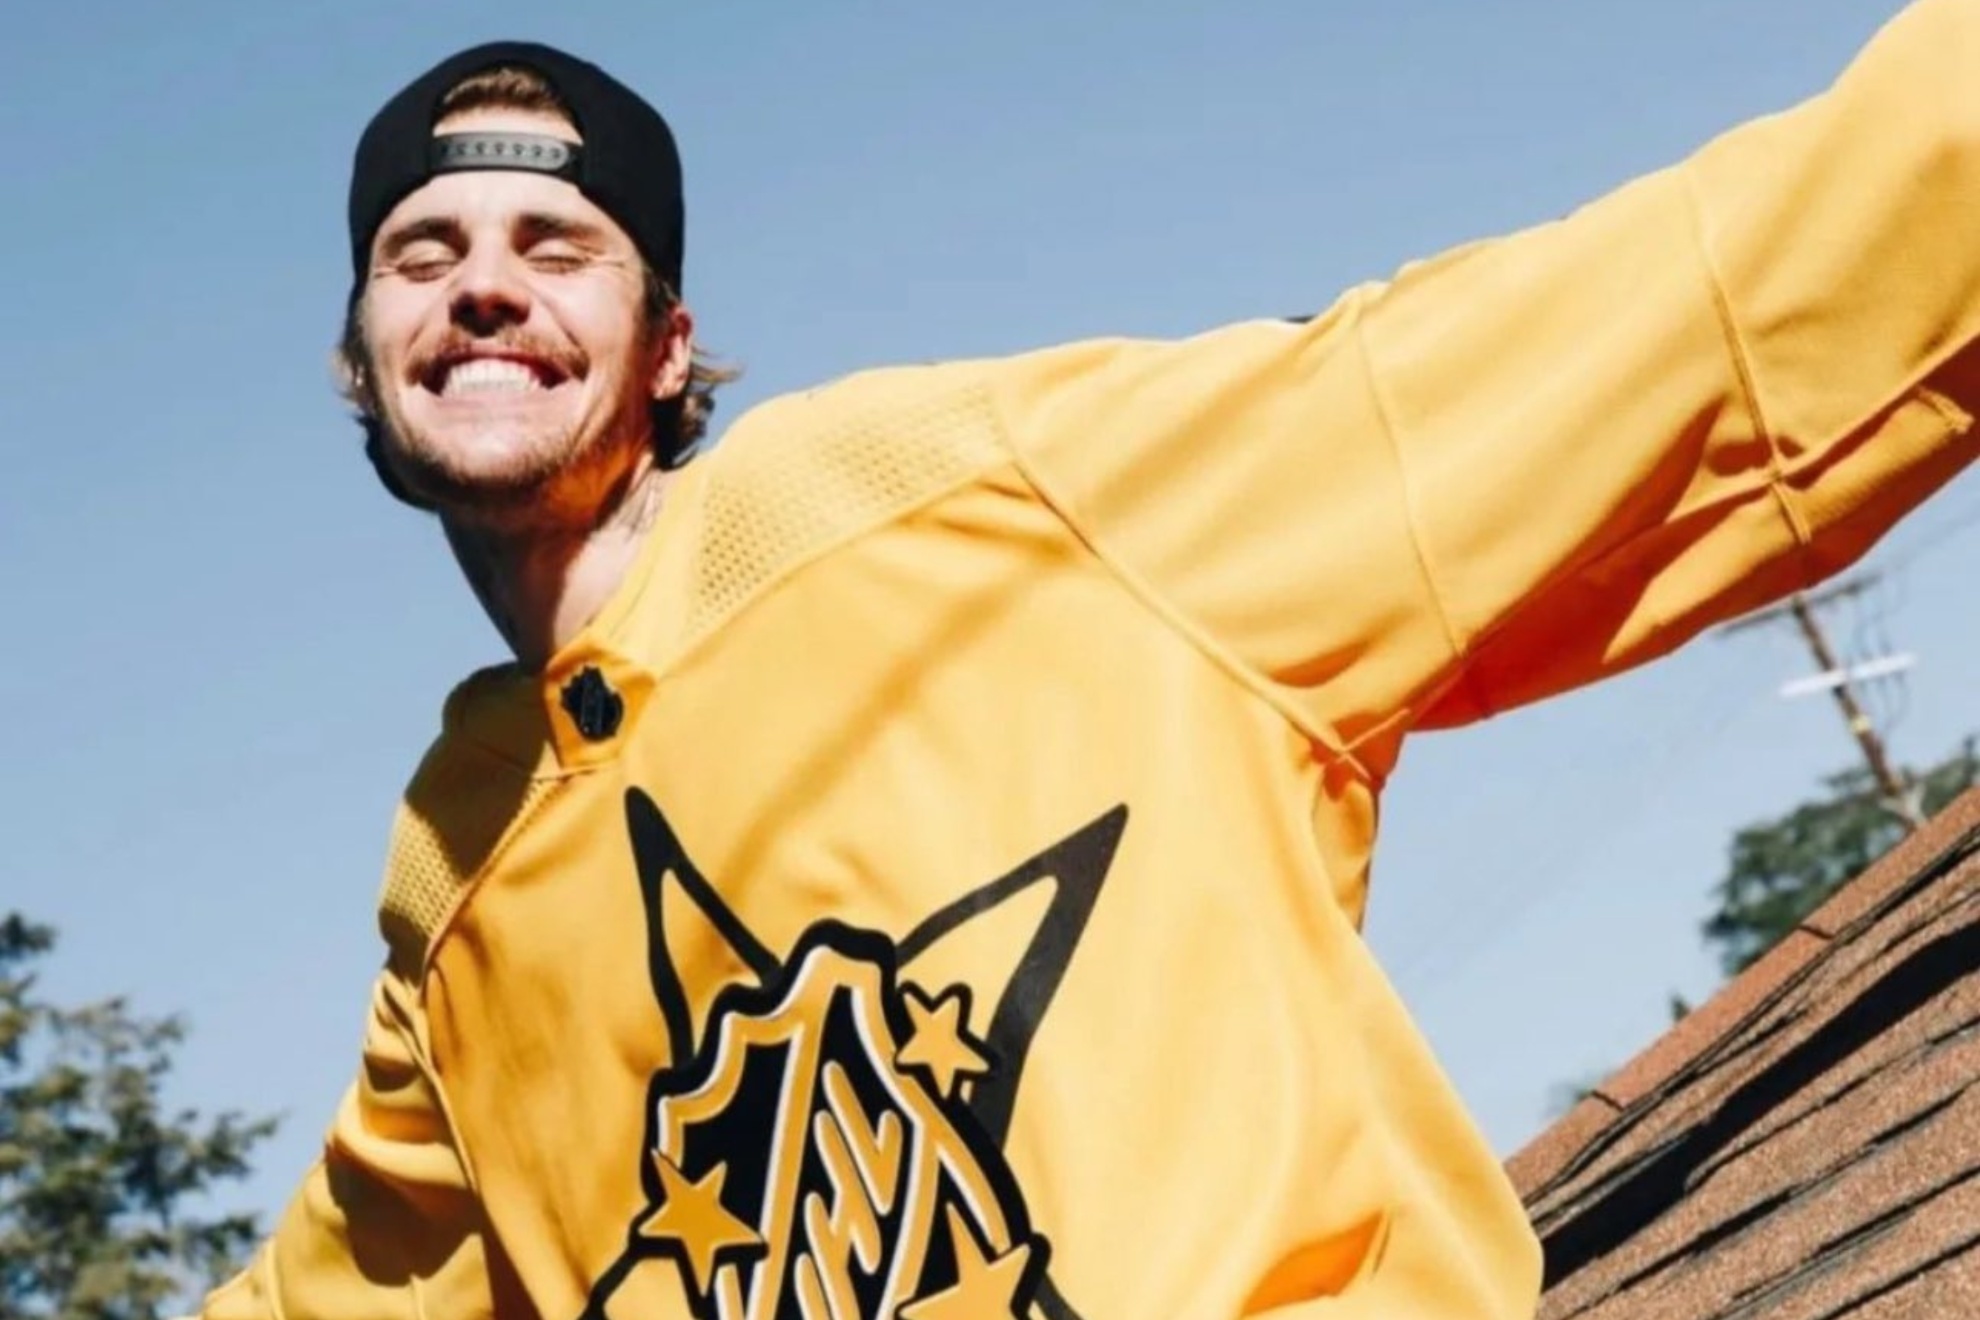 Justin Bieber donning one of the jerseys he designed for the NHL.